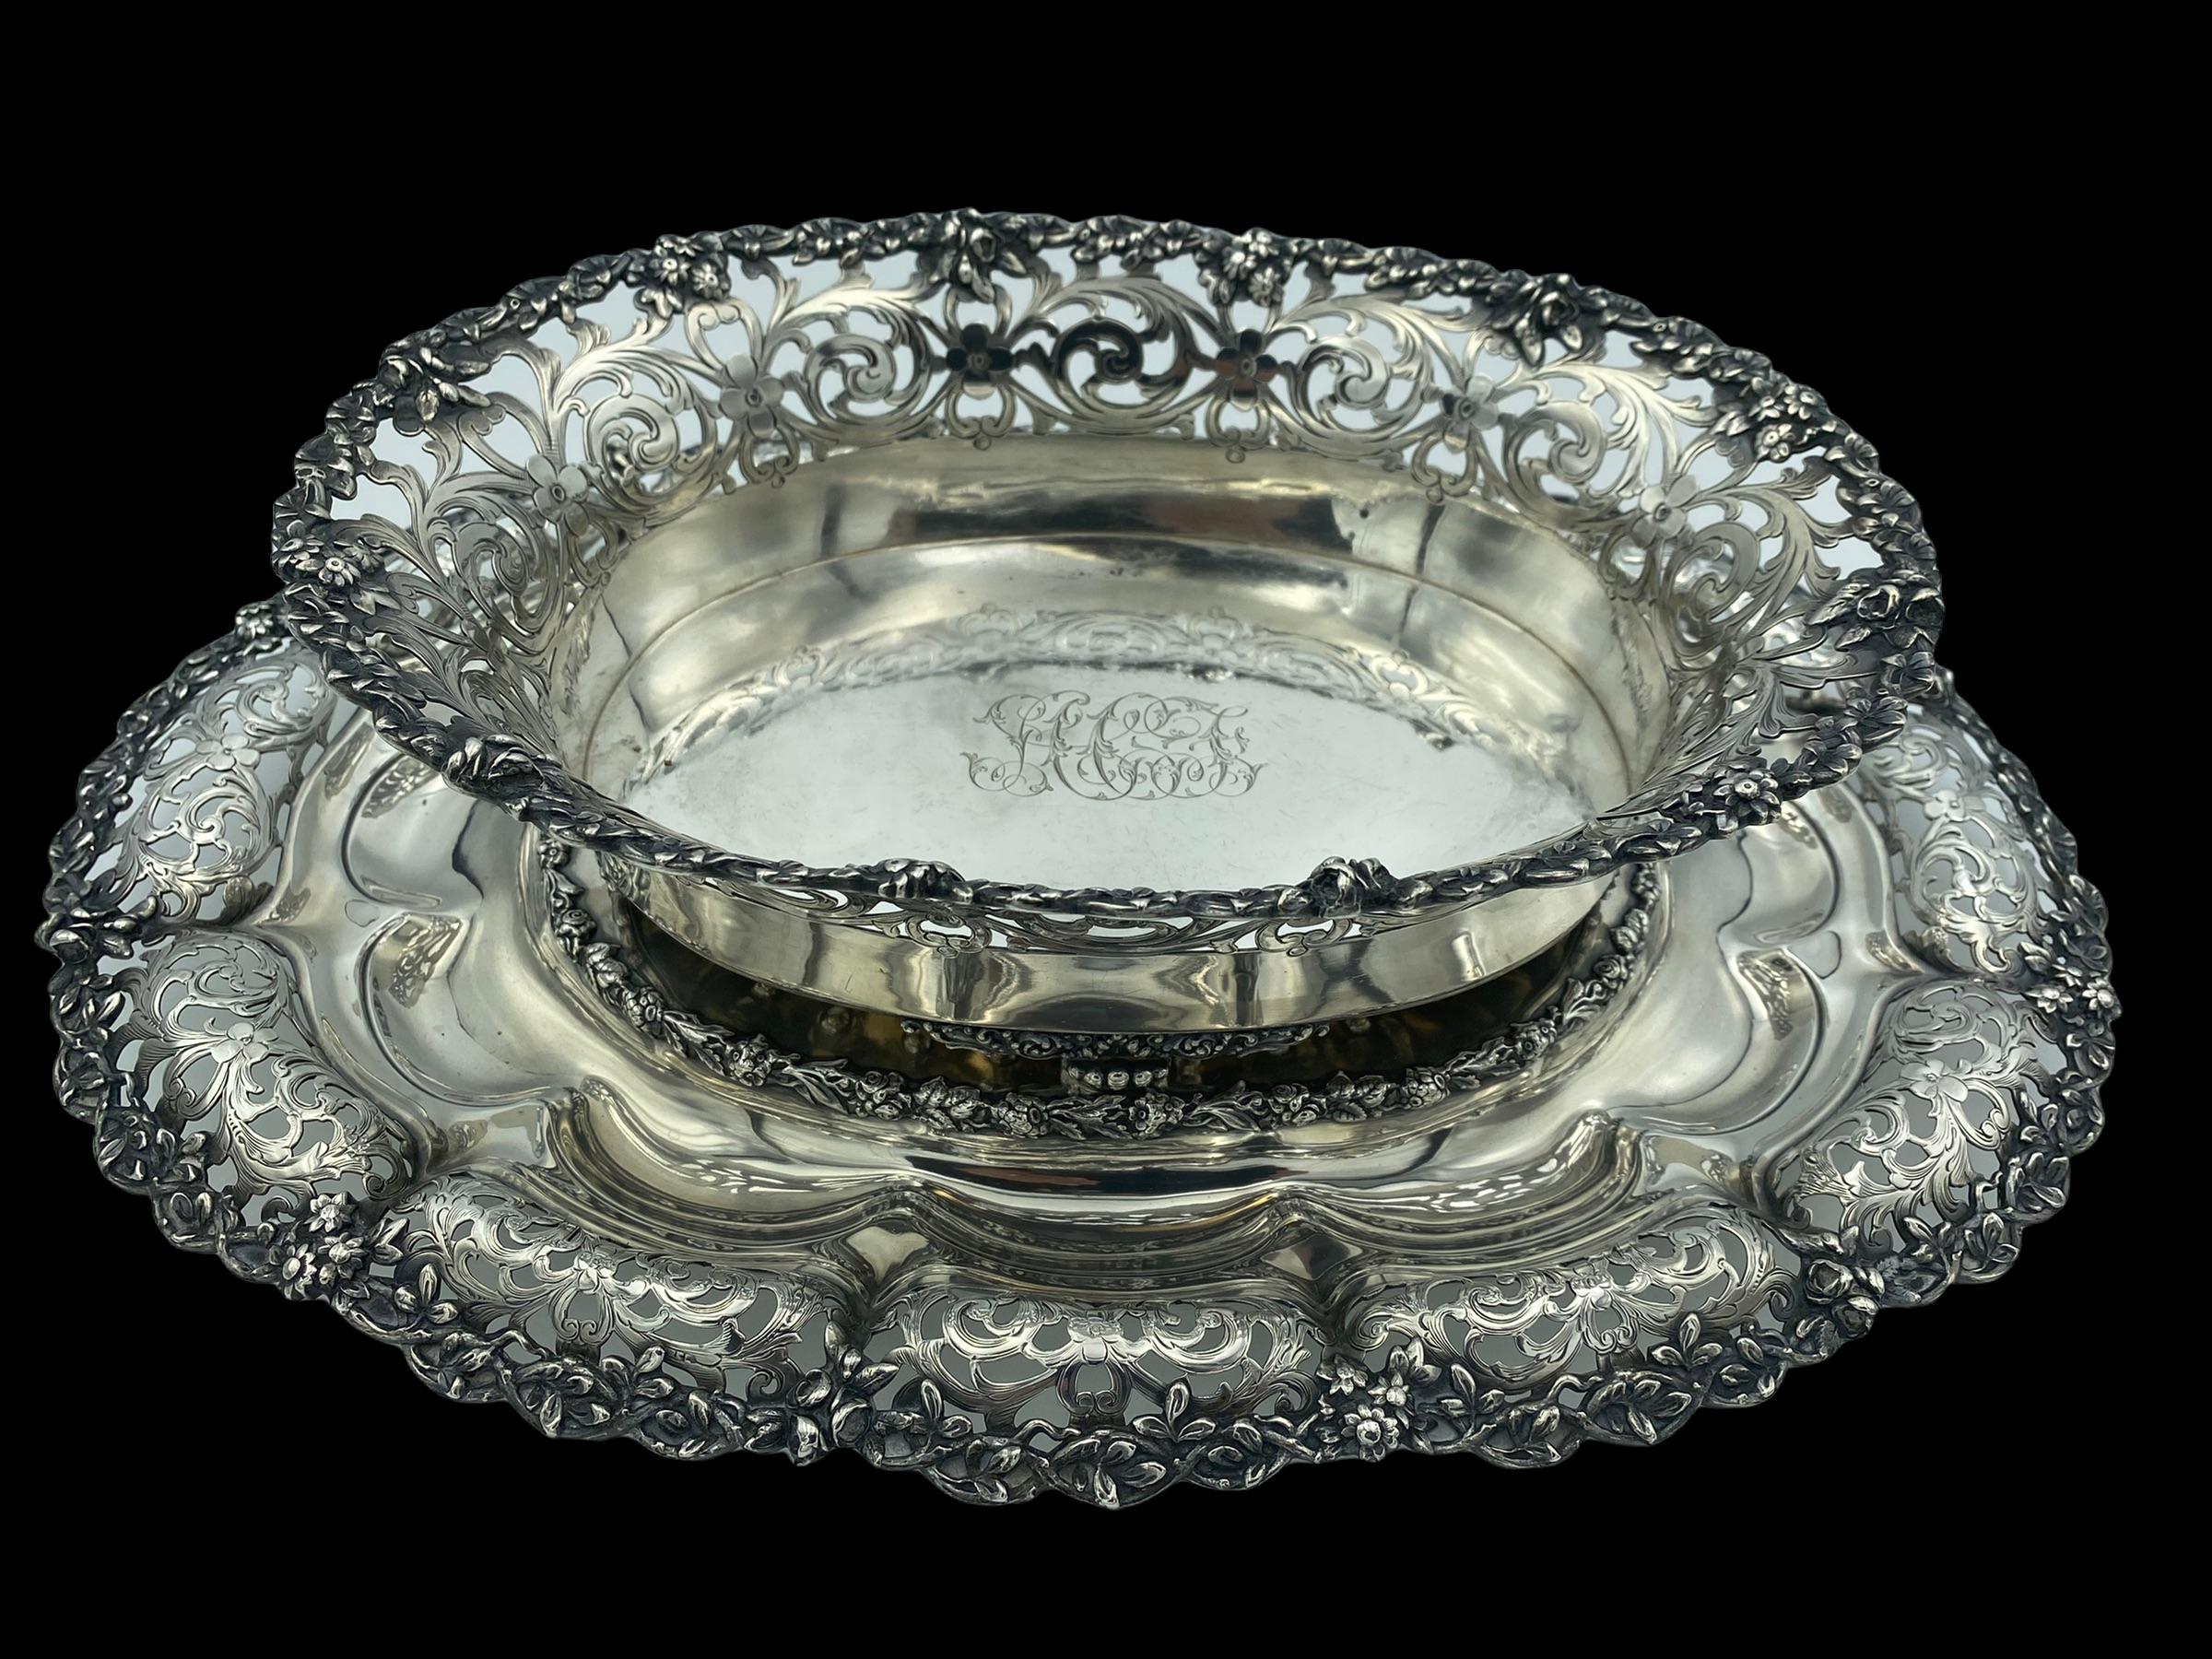 Tiffany & Co. Sterling Silver Basket with Tray - Art by Louis Comfort Tiffany